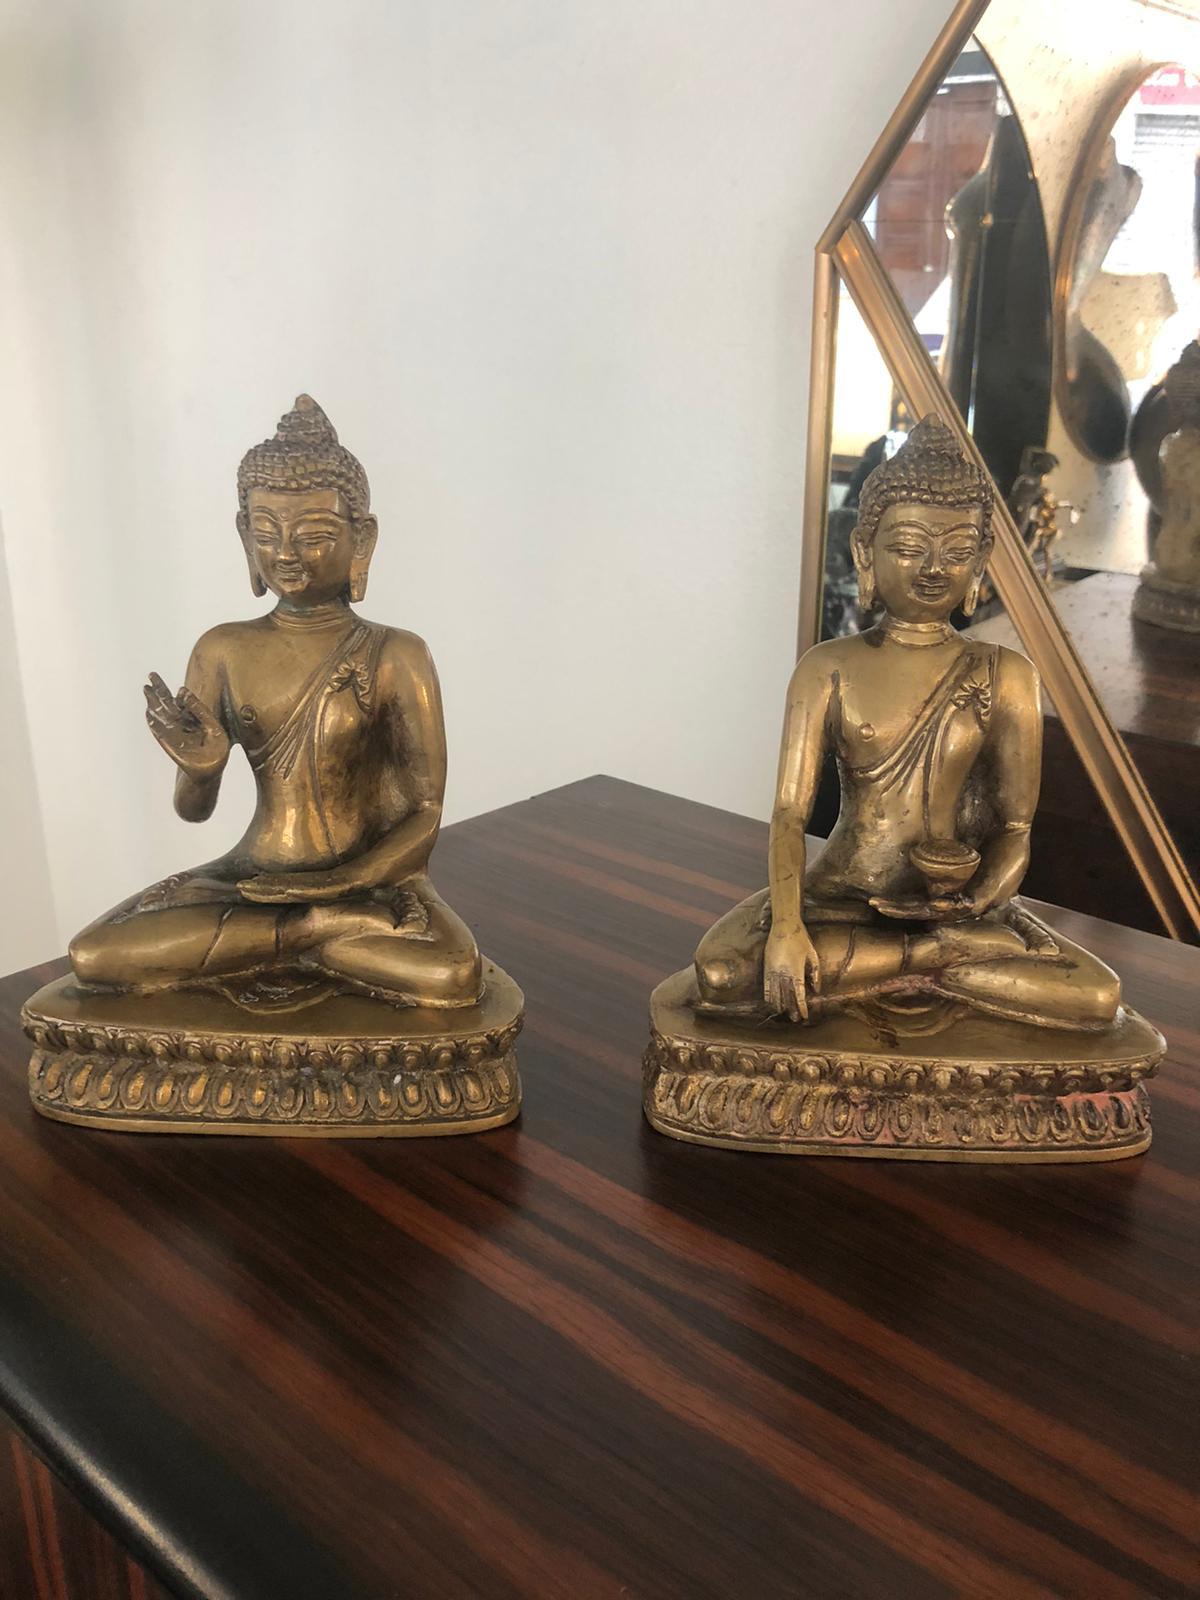 Pair of similar not identical vintage 20th century golden brass Buddah book end bookcase decorations. Pair of decorative items made of golden brass to be used as decorative desk accessories, paper weights, bookcase decorations or bookends.
They are